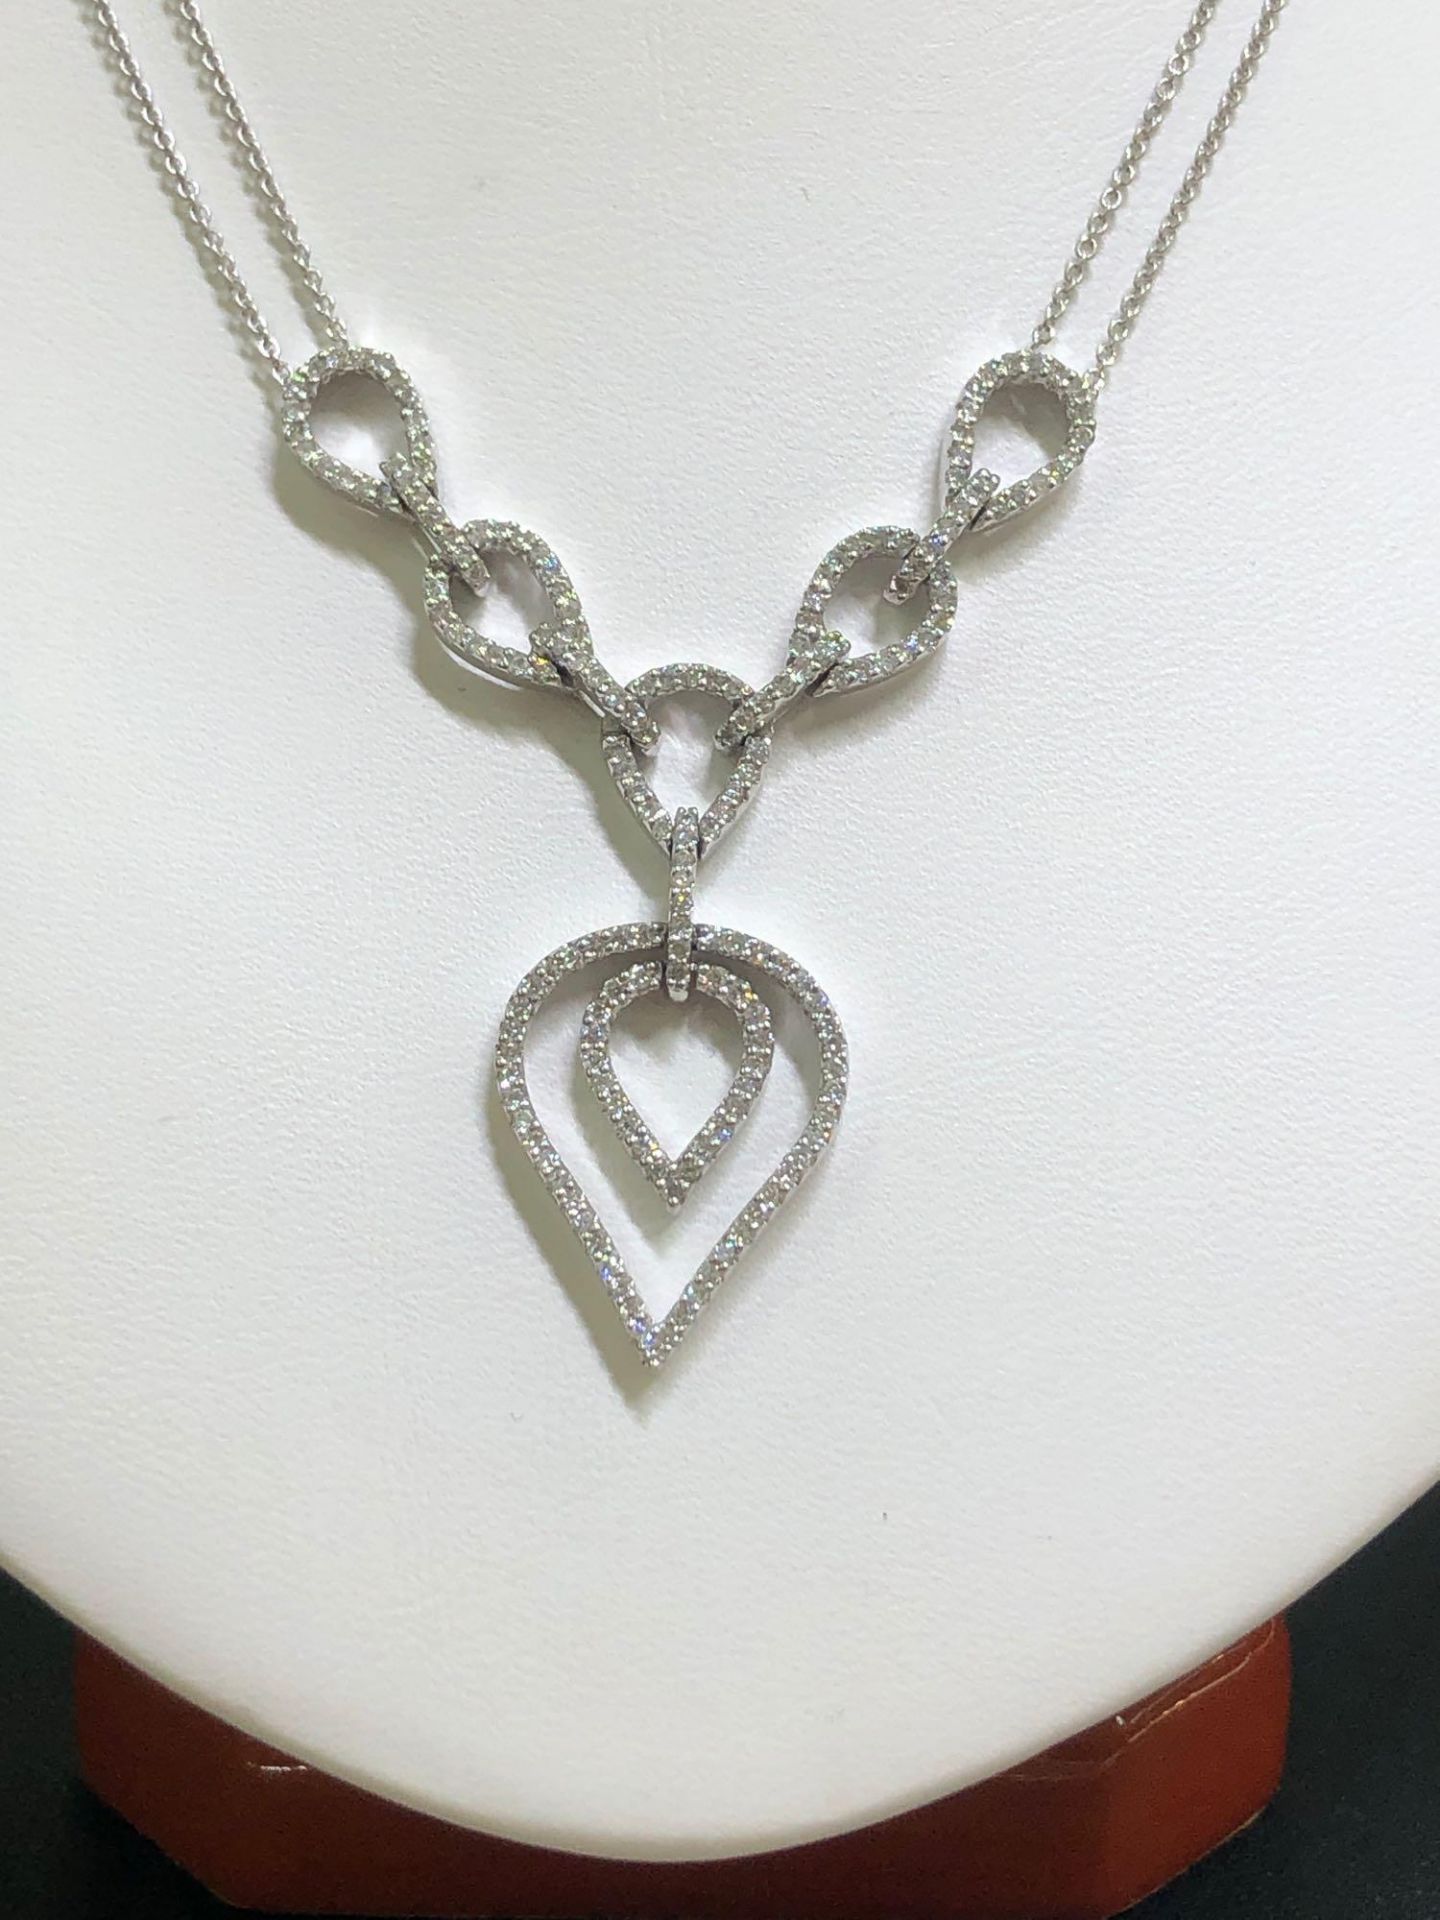 .98CT DIAMOND NECKLACE 14KT WHITE GOLD - Image 2 of 4